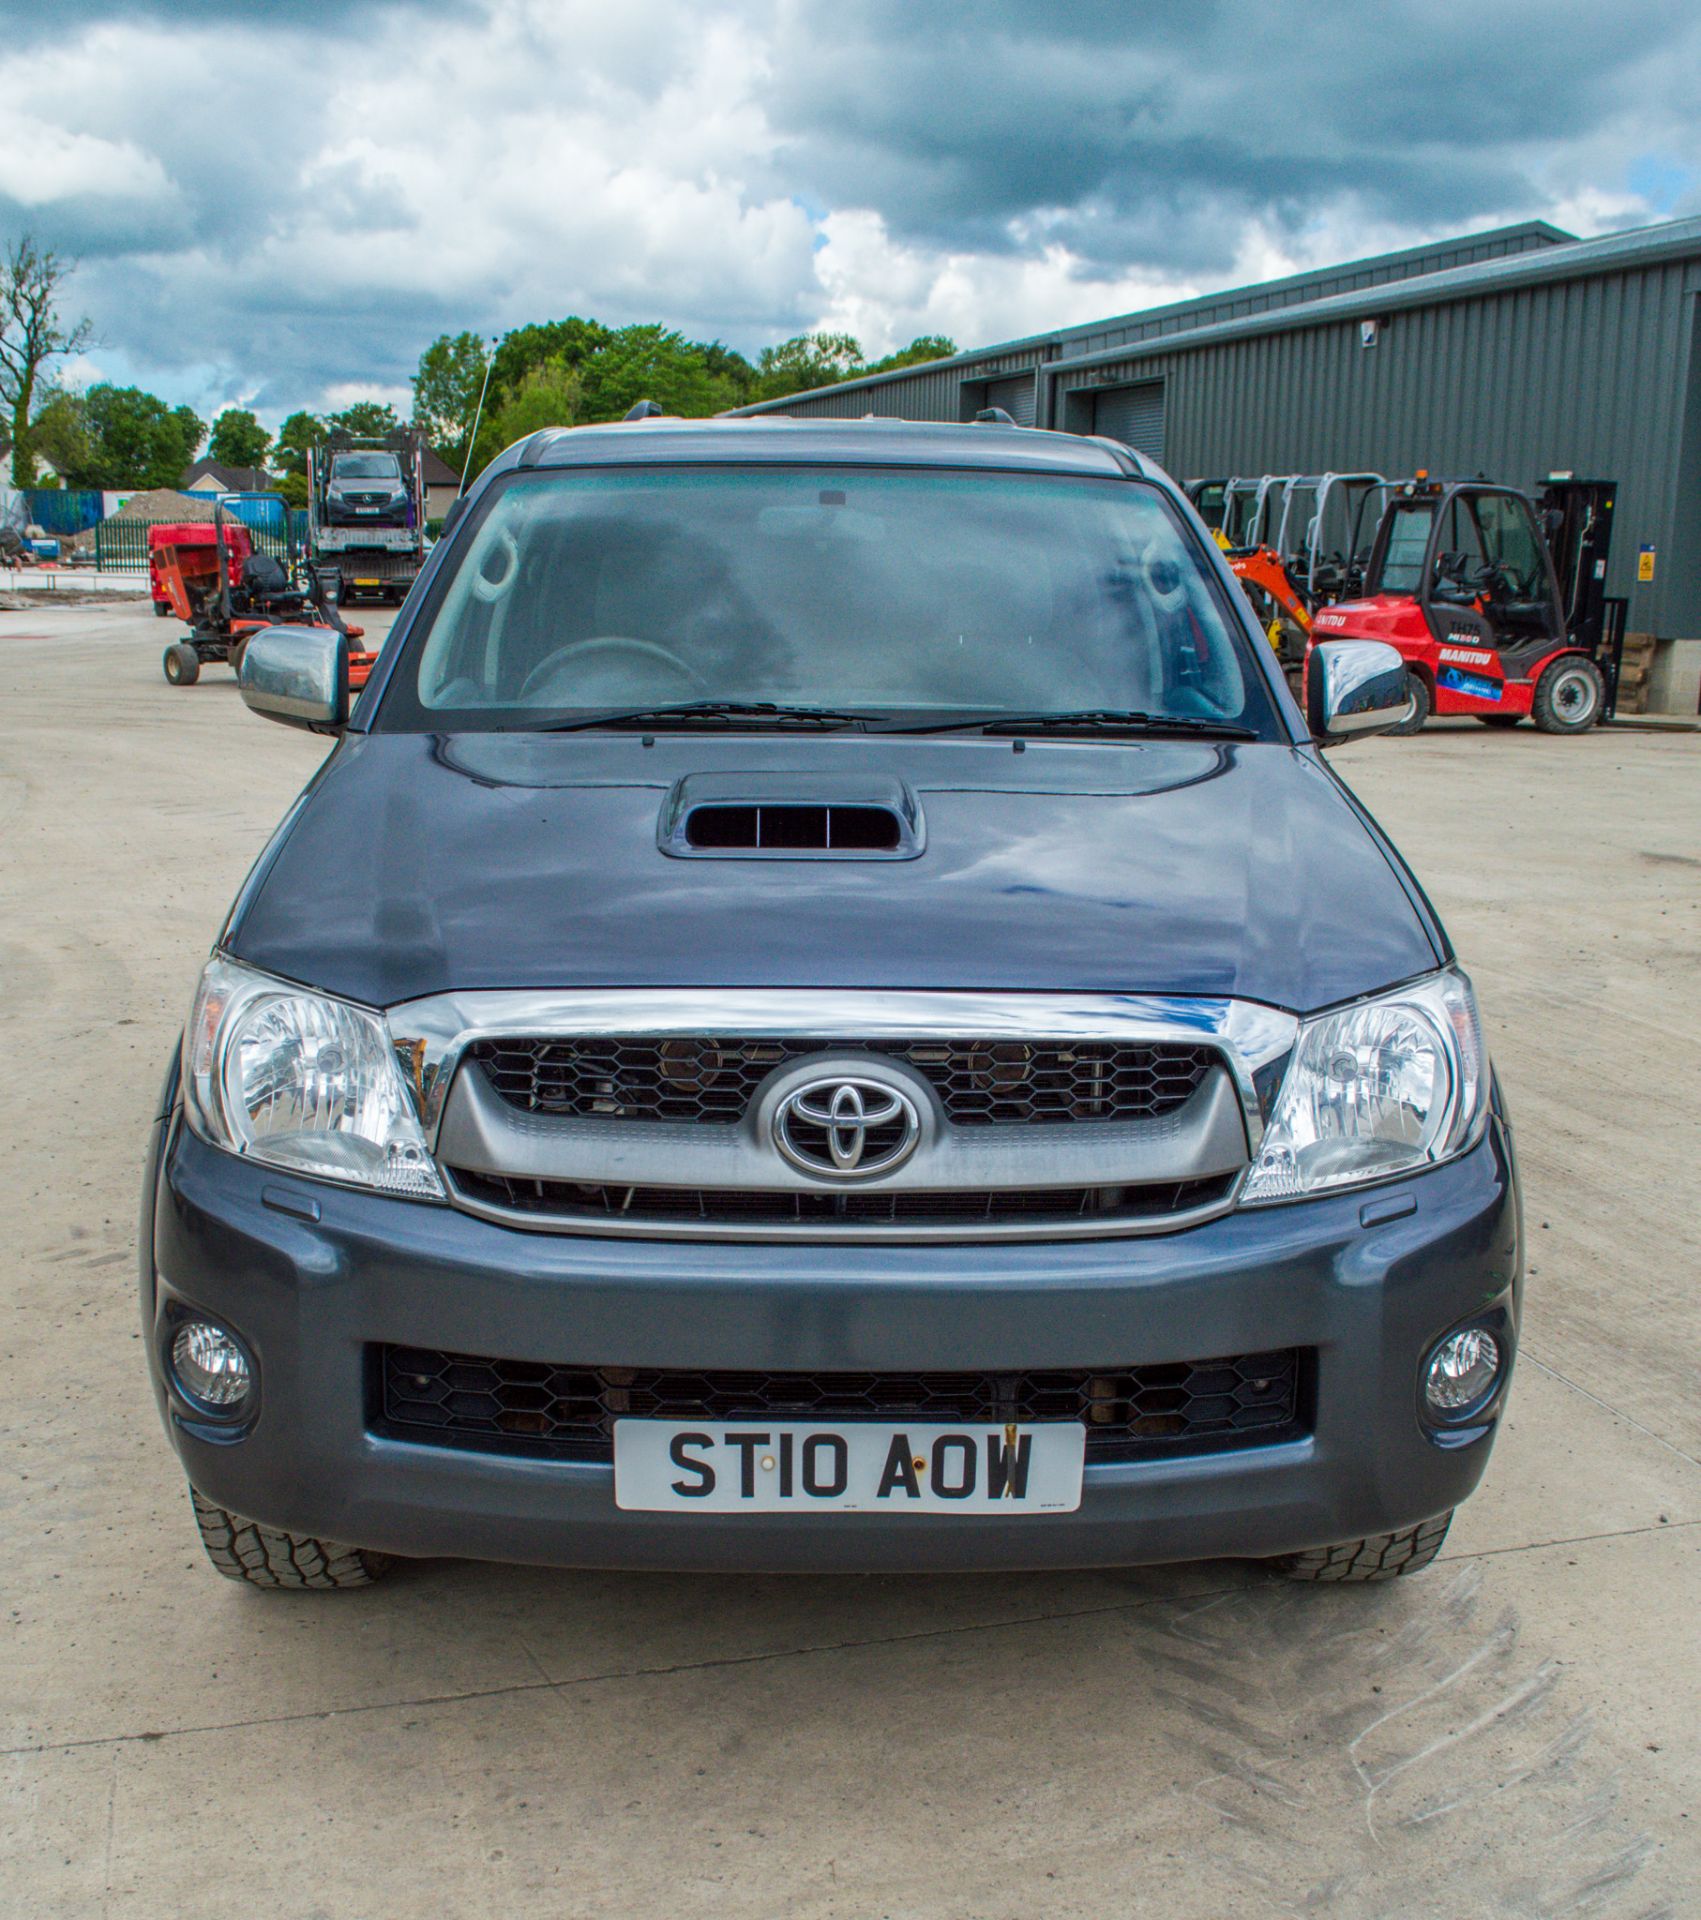 Toyota Hilux 2.5 D-4D 144 HL3 4wd manual double cab pick up Reg No: ST10 AOW Date of Registration: - Image 5 of 25